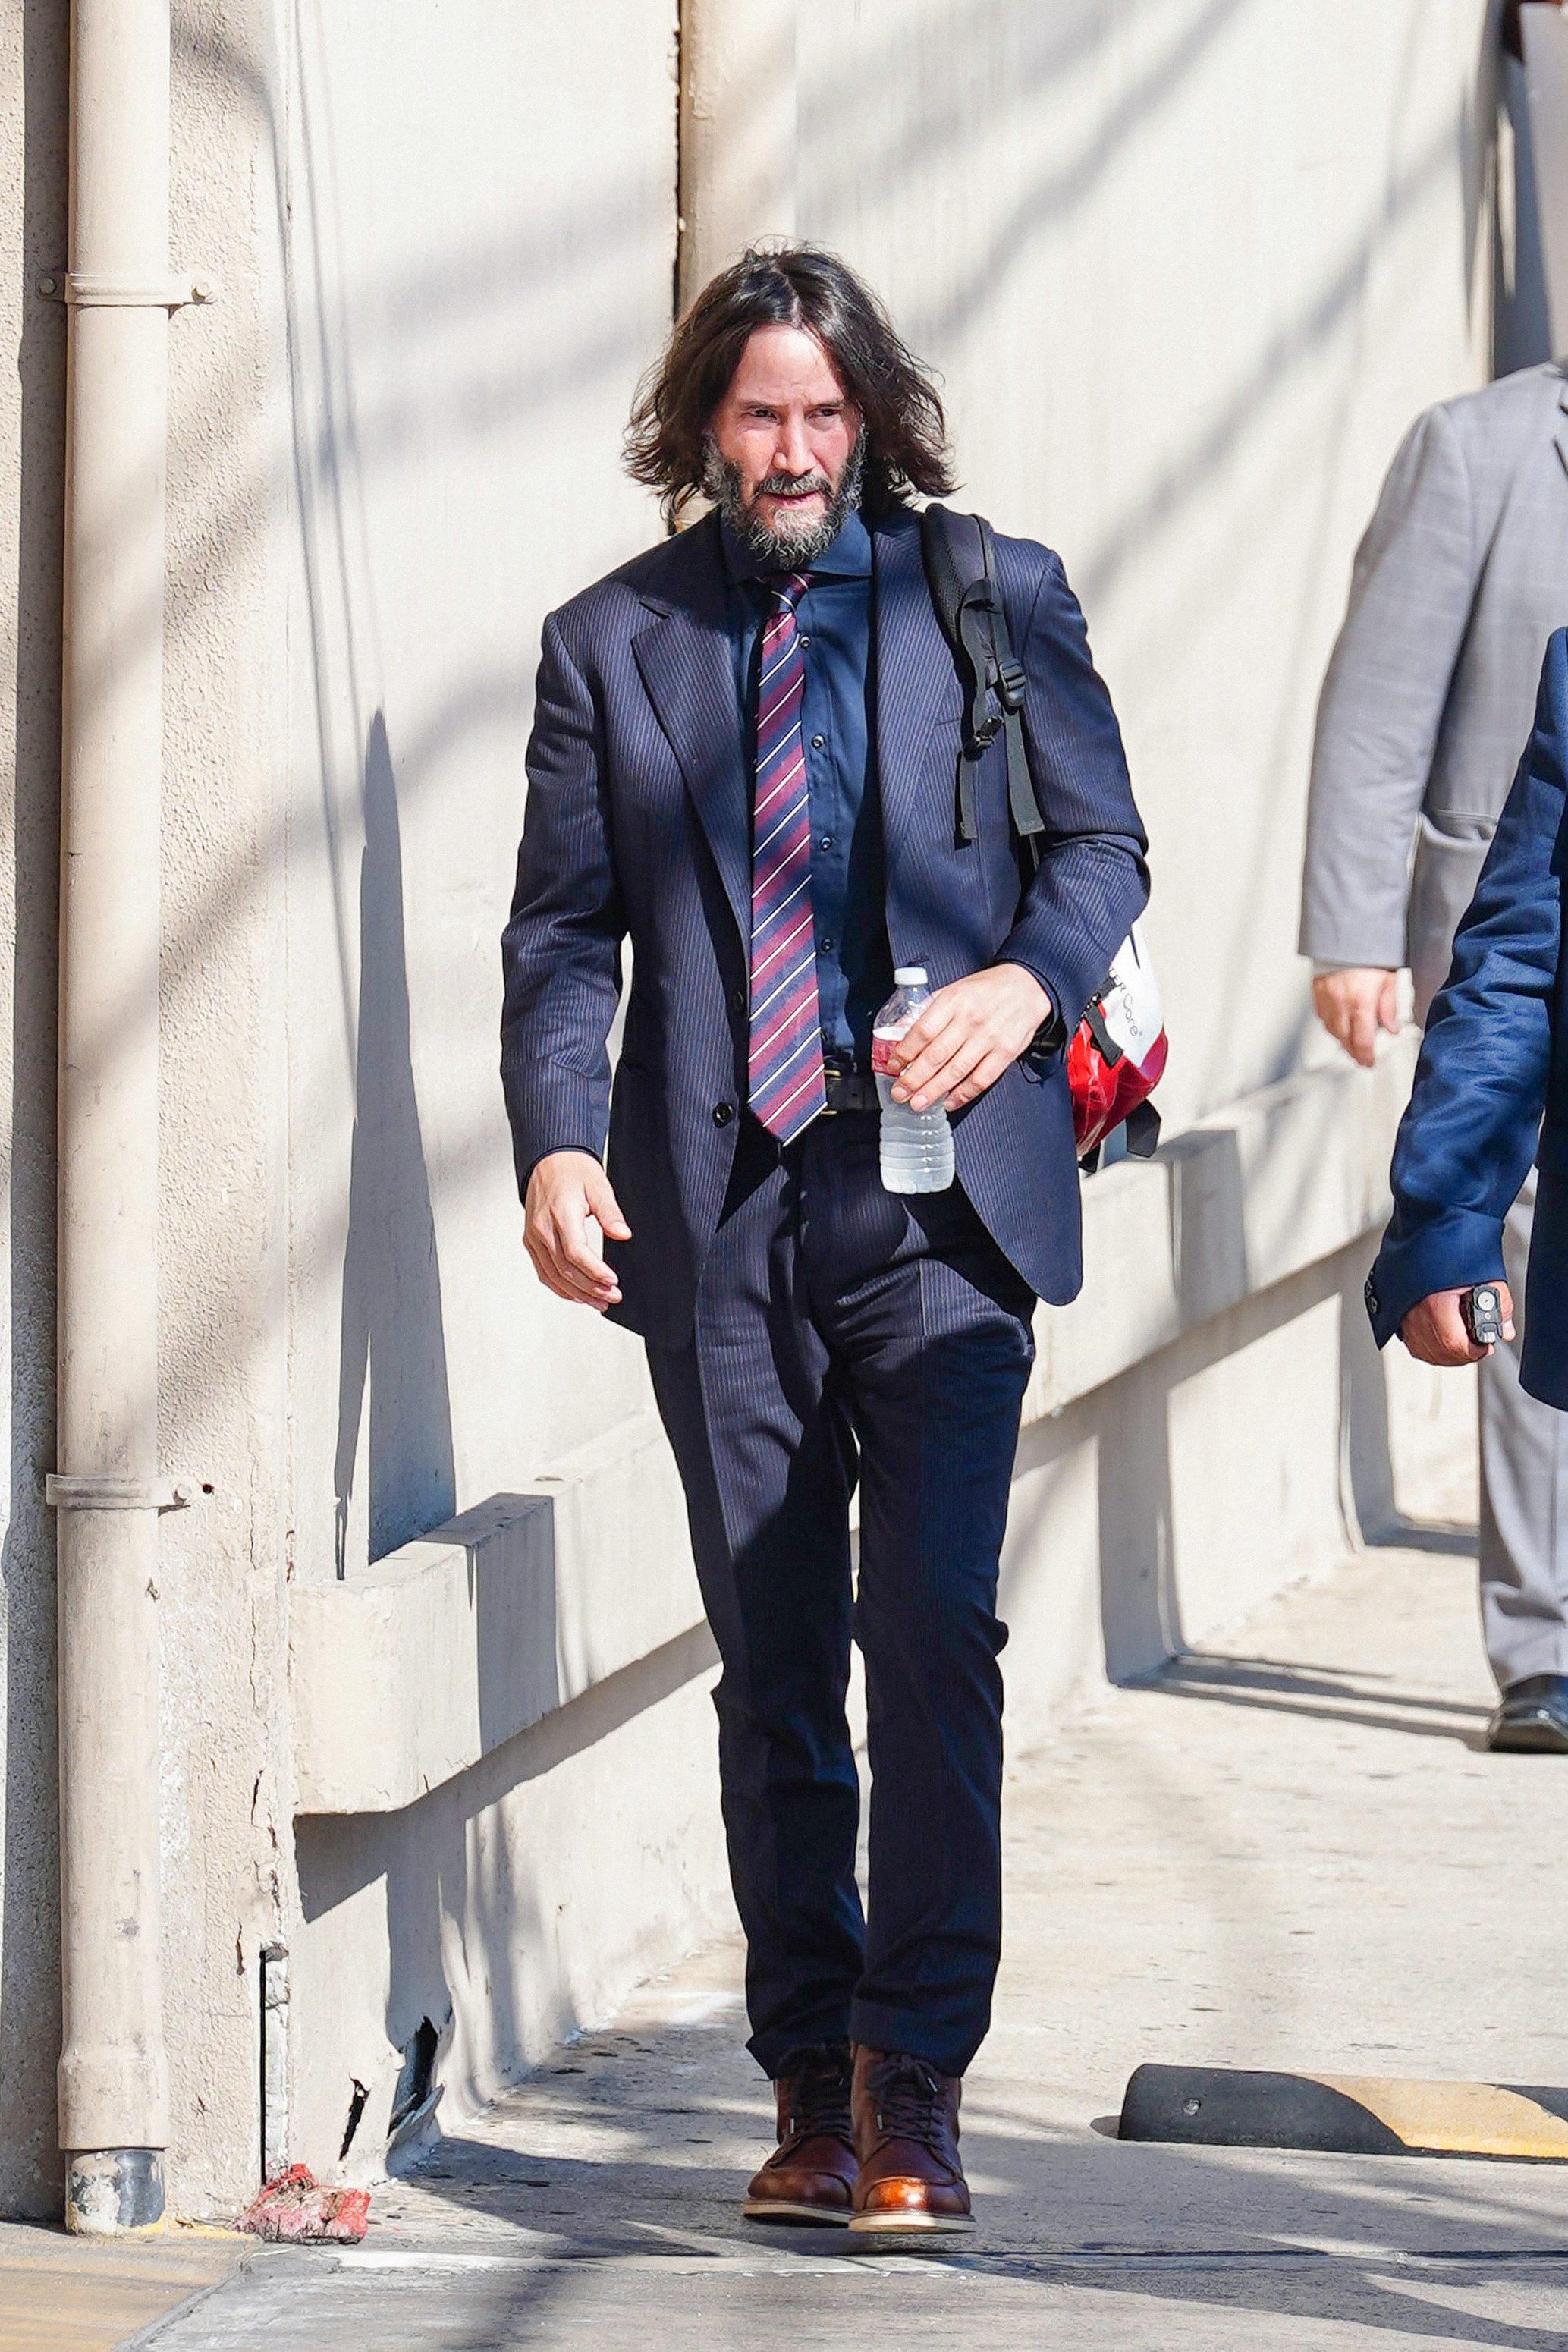 Keanu Reeves arriving at the "Jimmy Kimmel Live" show on October 05, 2022 in Los Angeles, California | Source: Getty Images